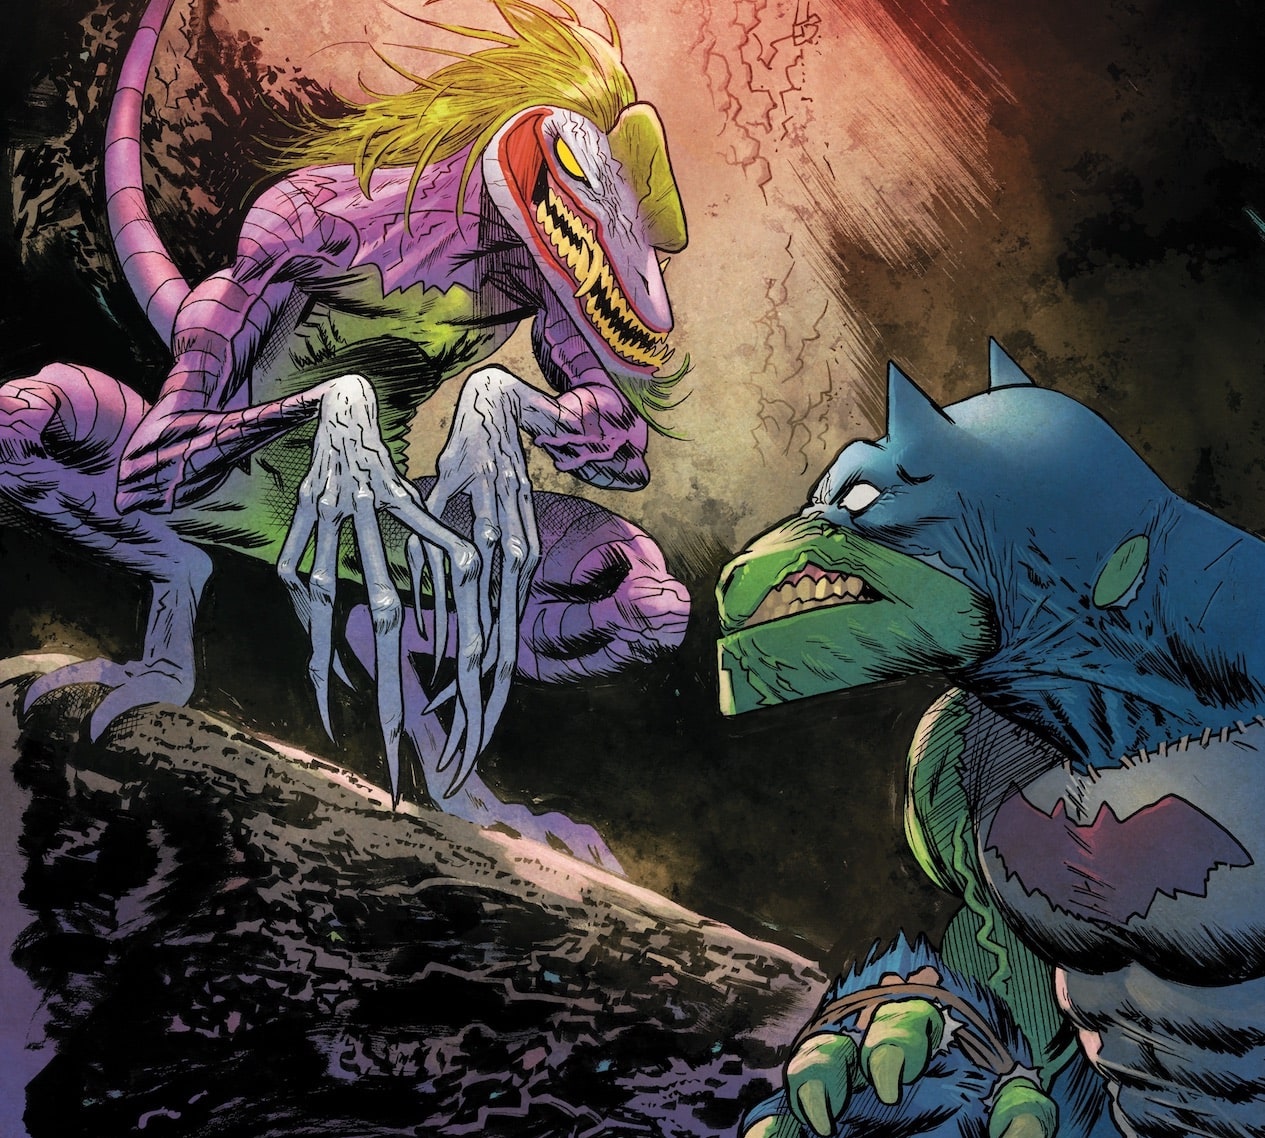 DC First Look: The Jurassic League #1